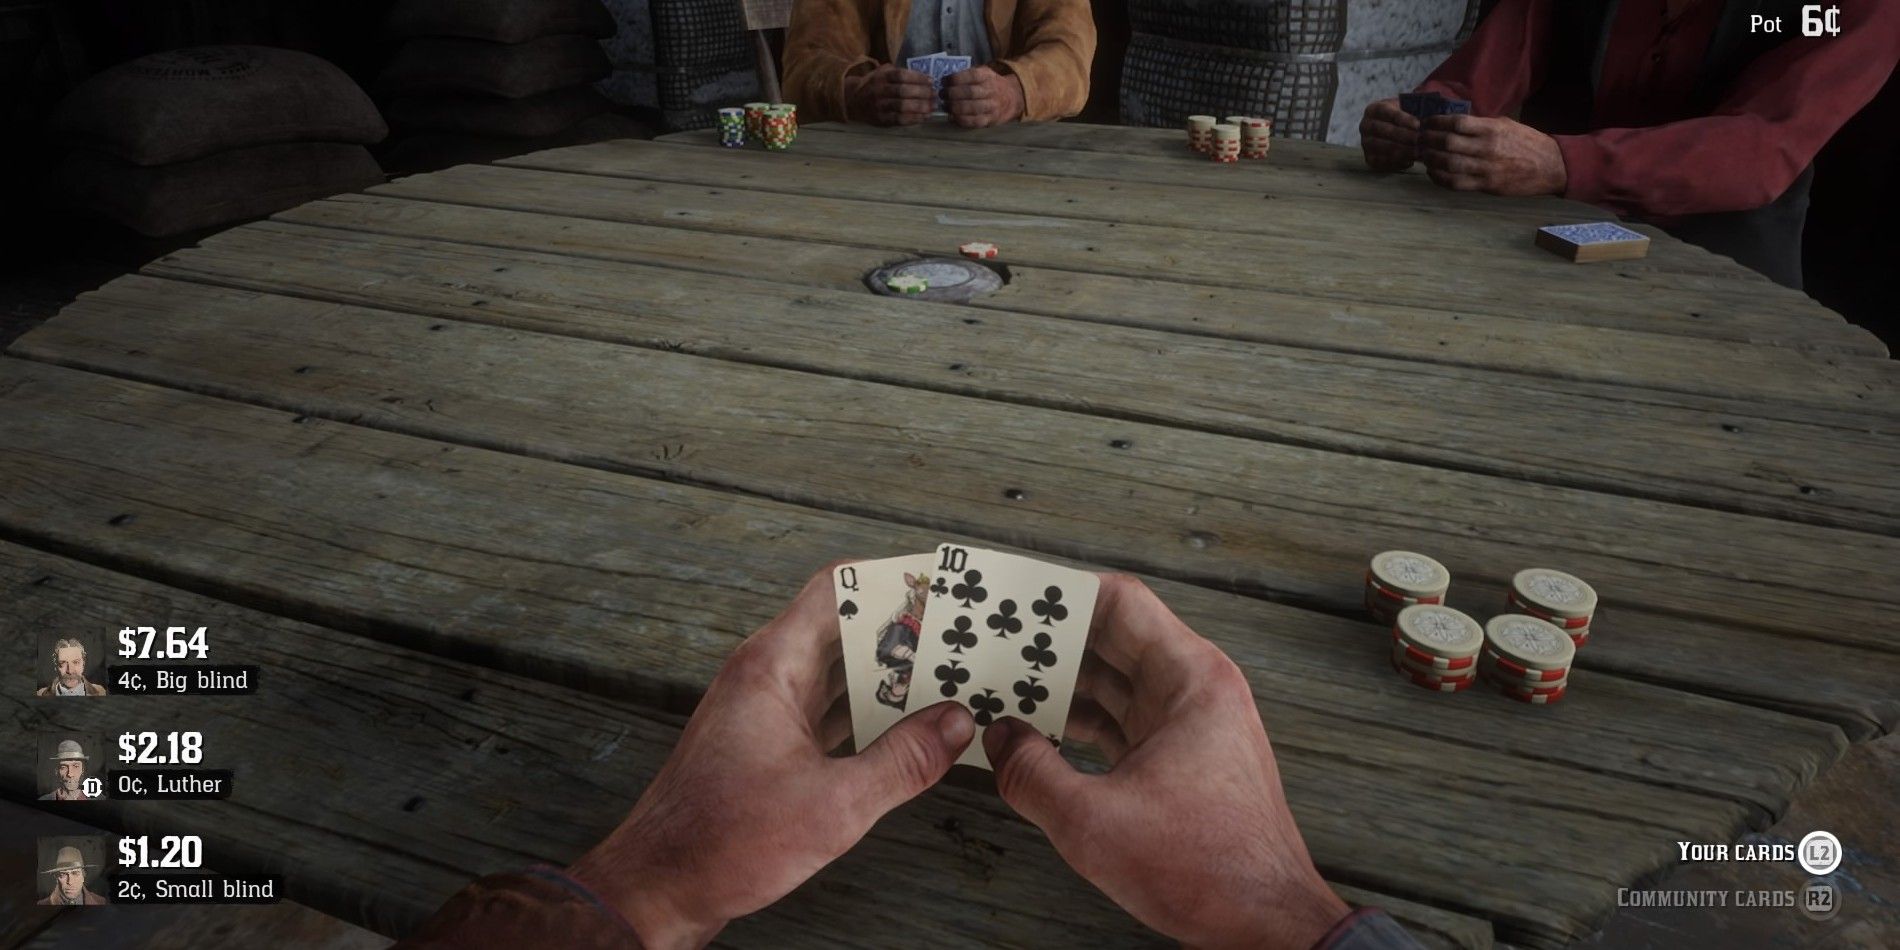 Learning the poker hands of RDR 2 is the first step towards victory.